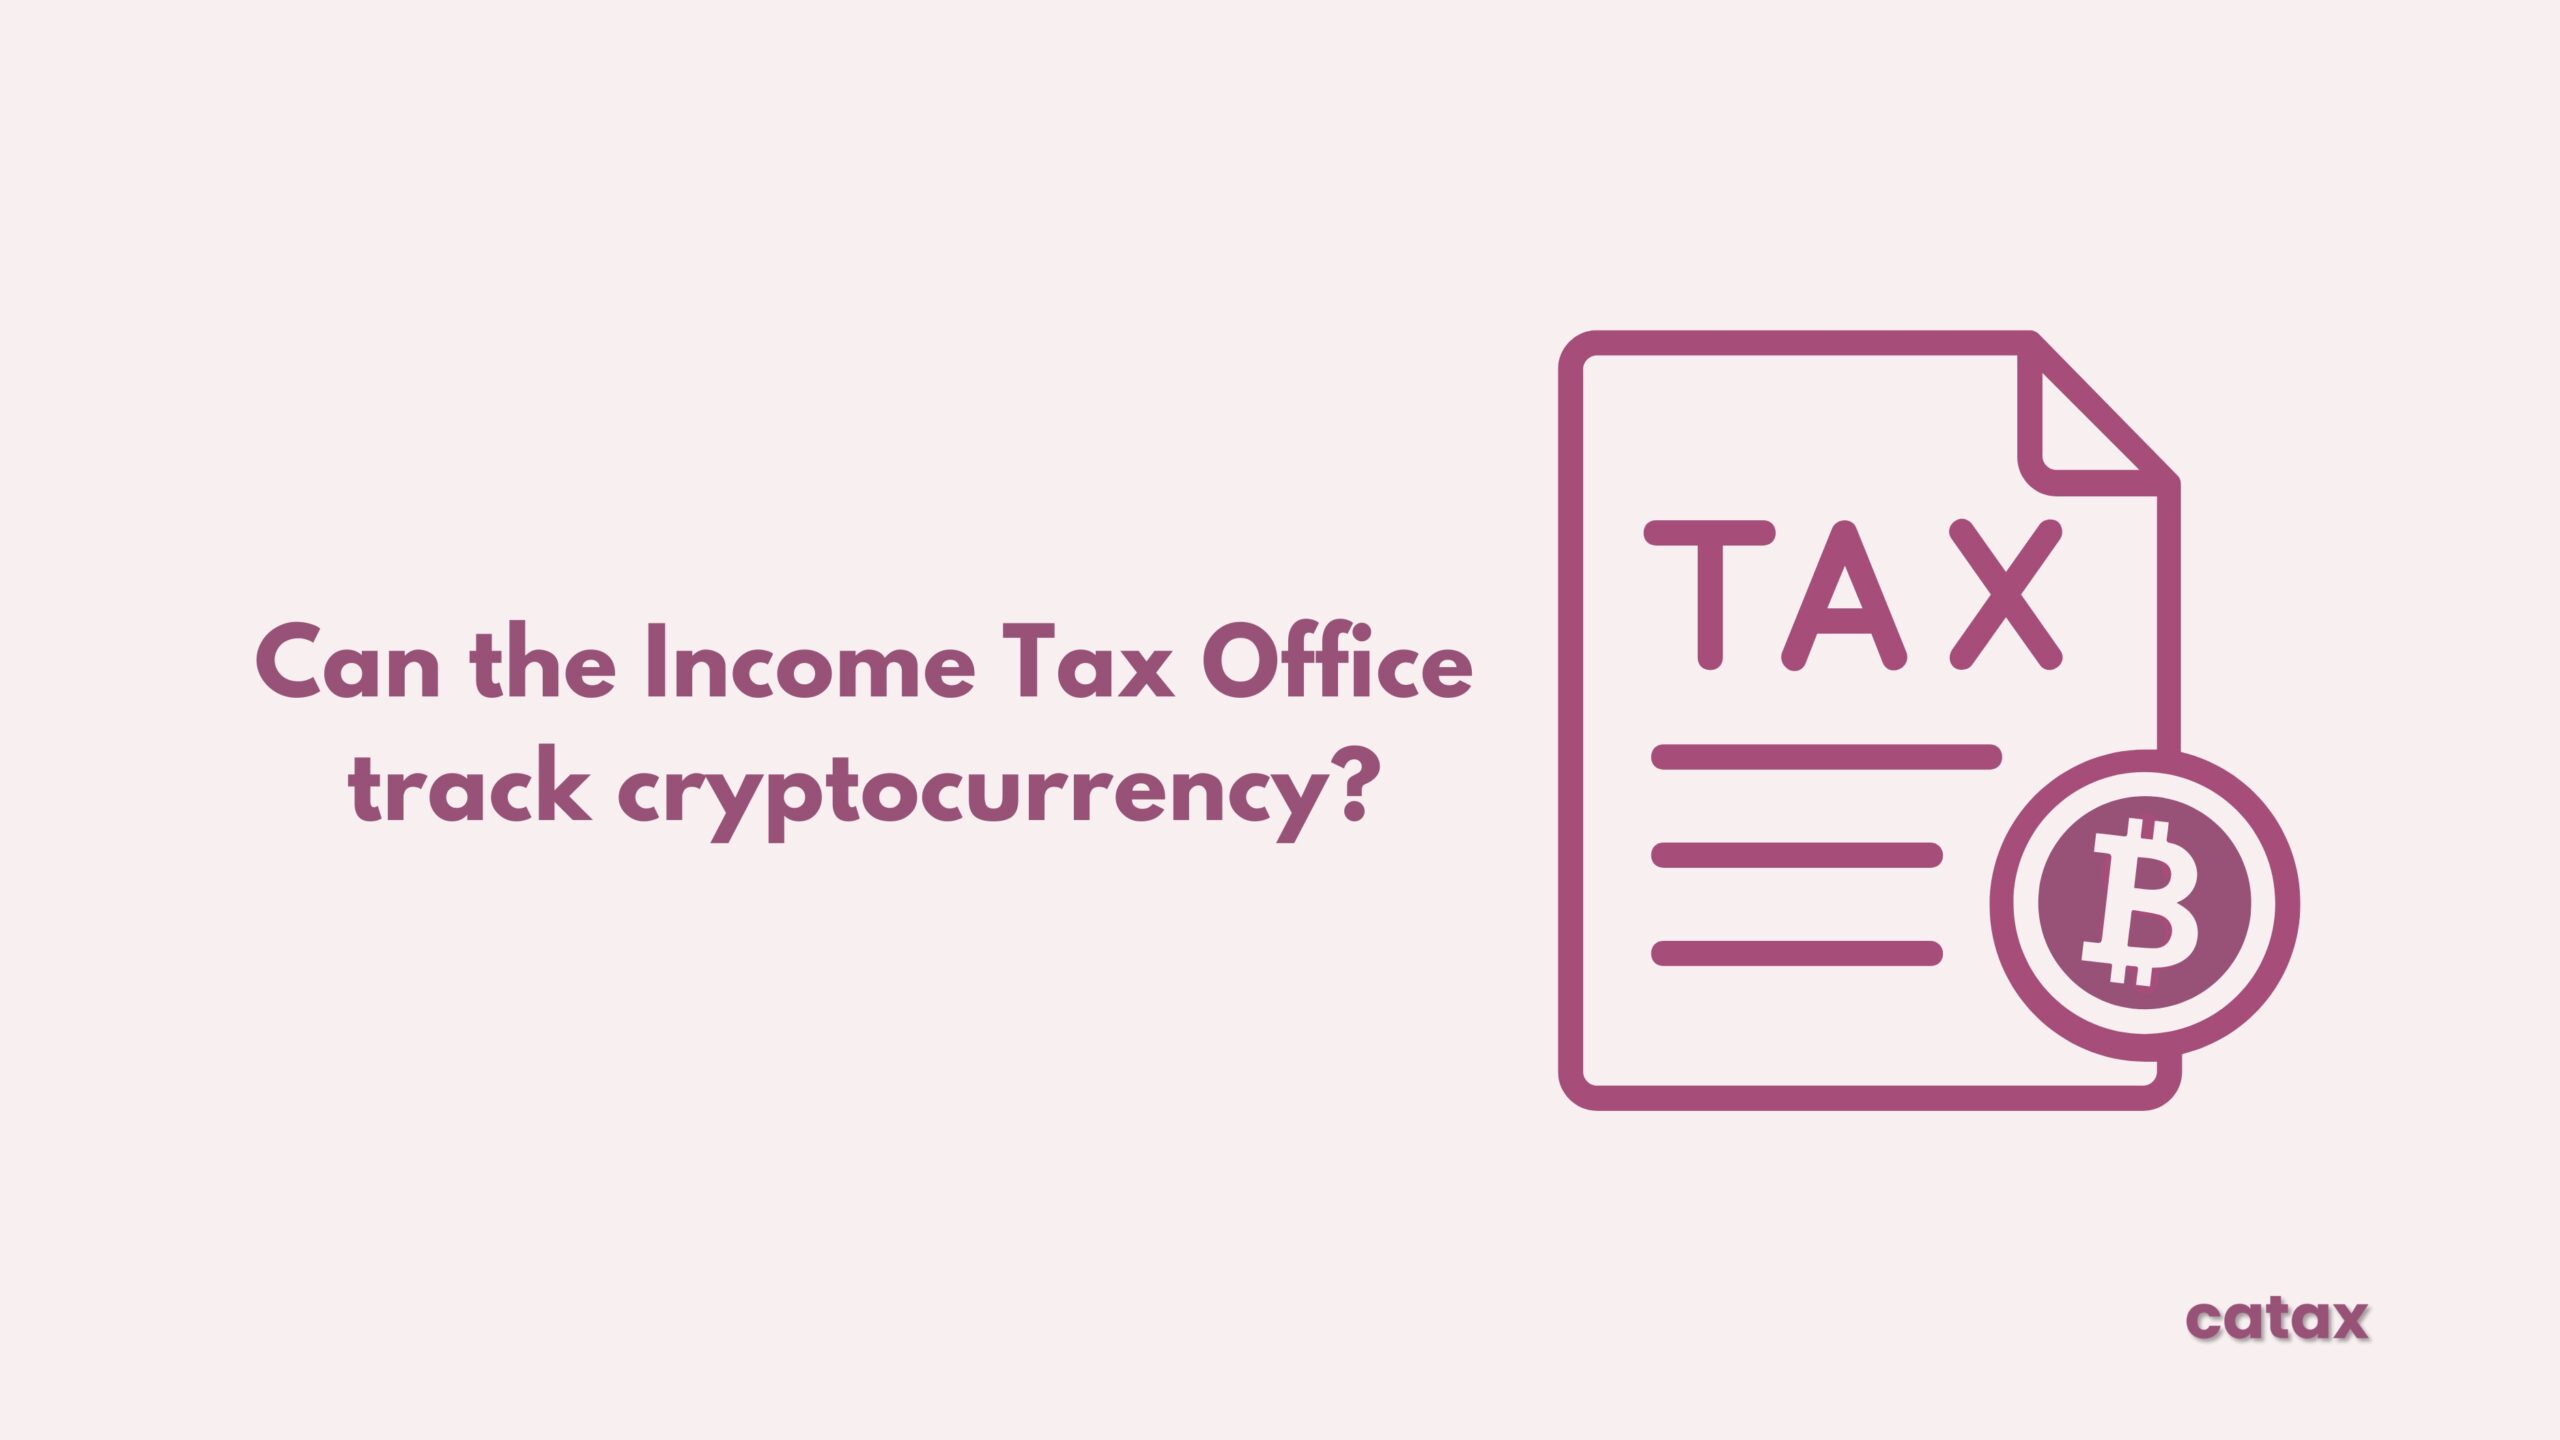 Can the Income Tax Office track cryptocurrency?